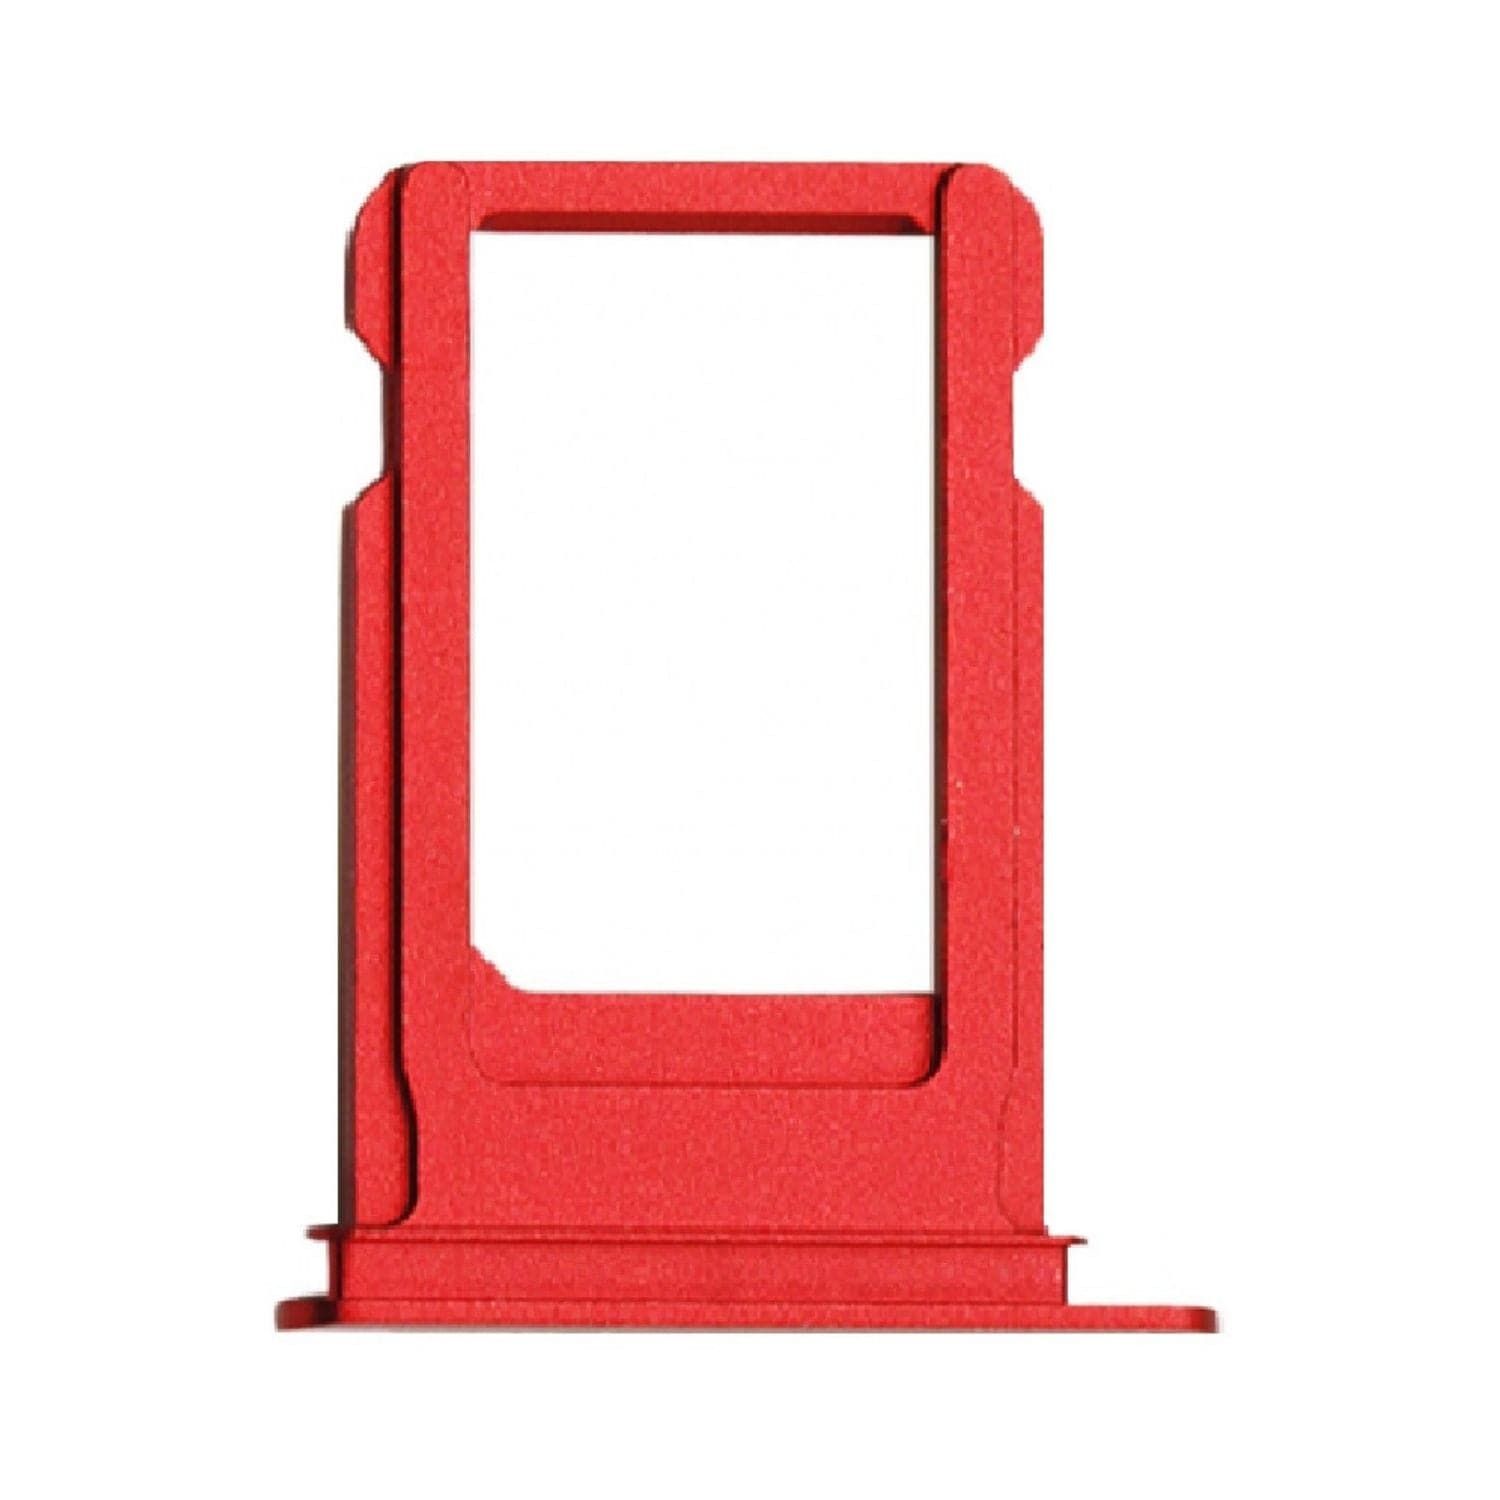 Sim Tray for iPhone 7 Plus Red